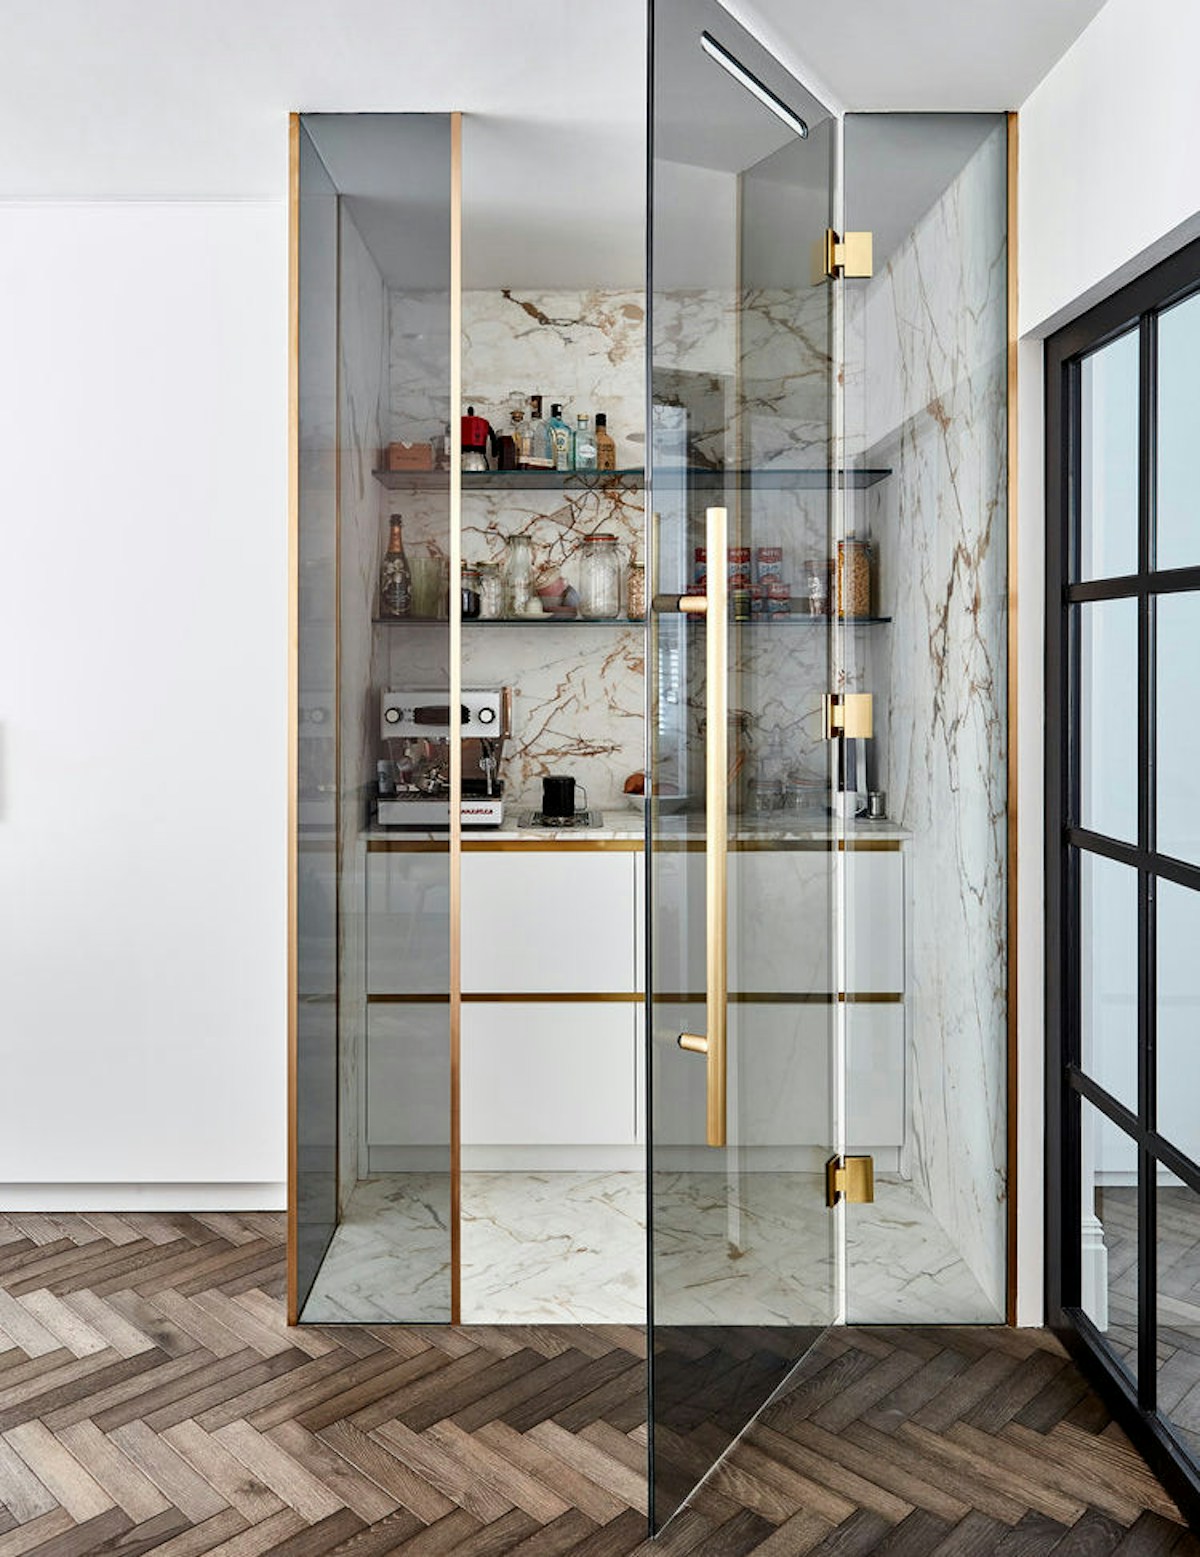 Rise Of The Luxe Larder - The Latest Kitchen Trends in 2019 with Blakes London - LuxDeco.com